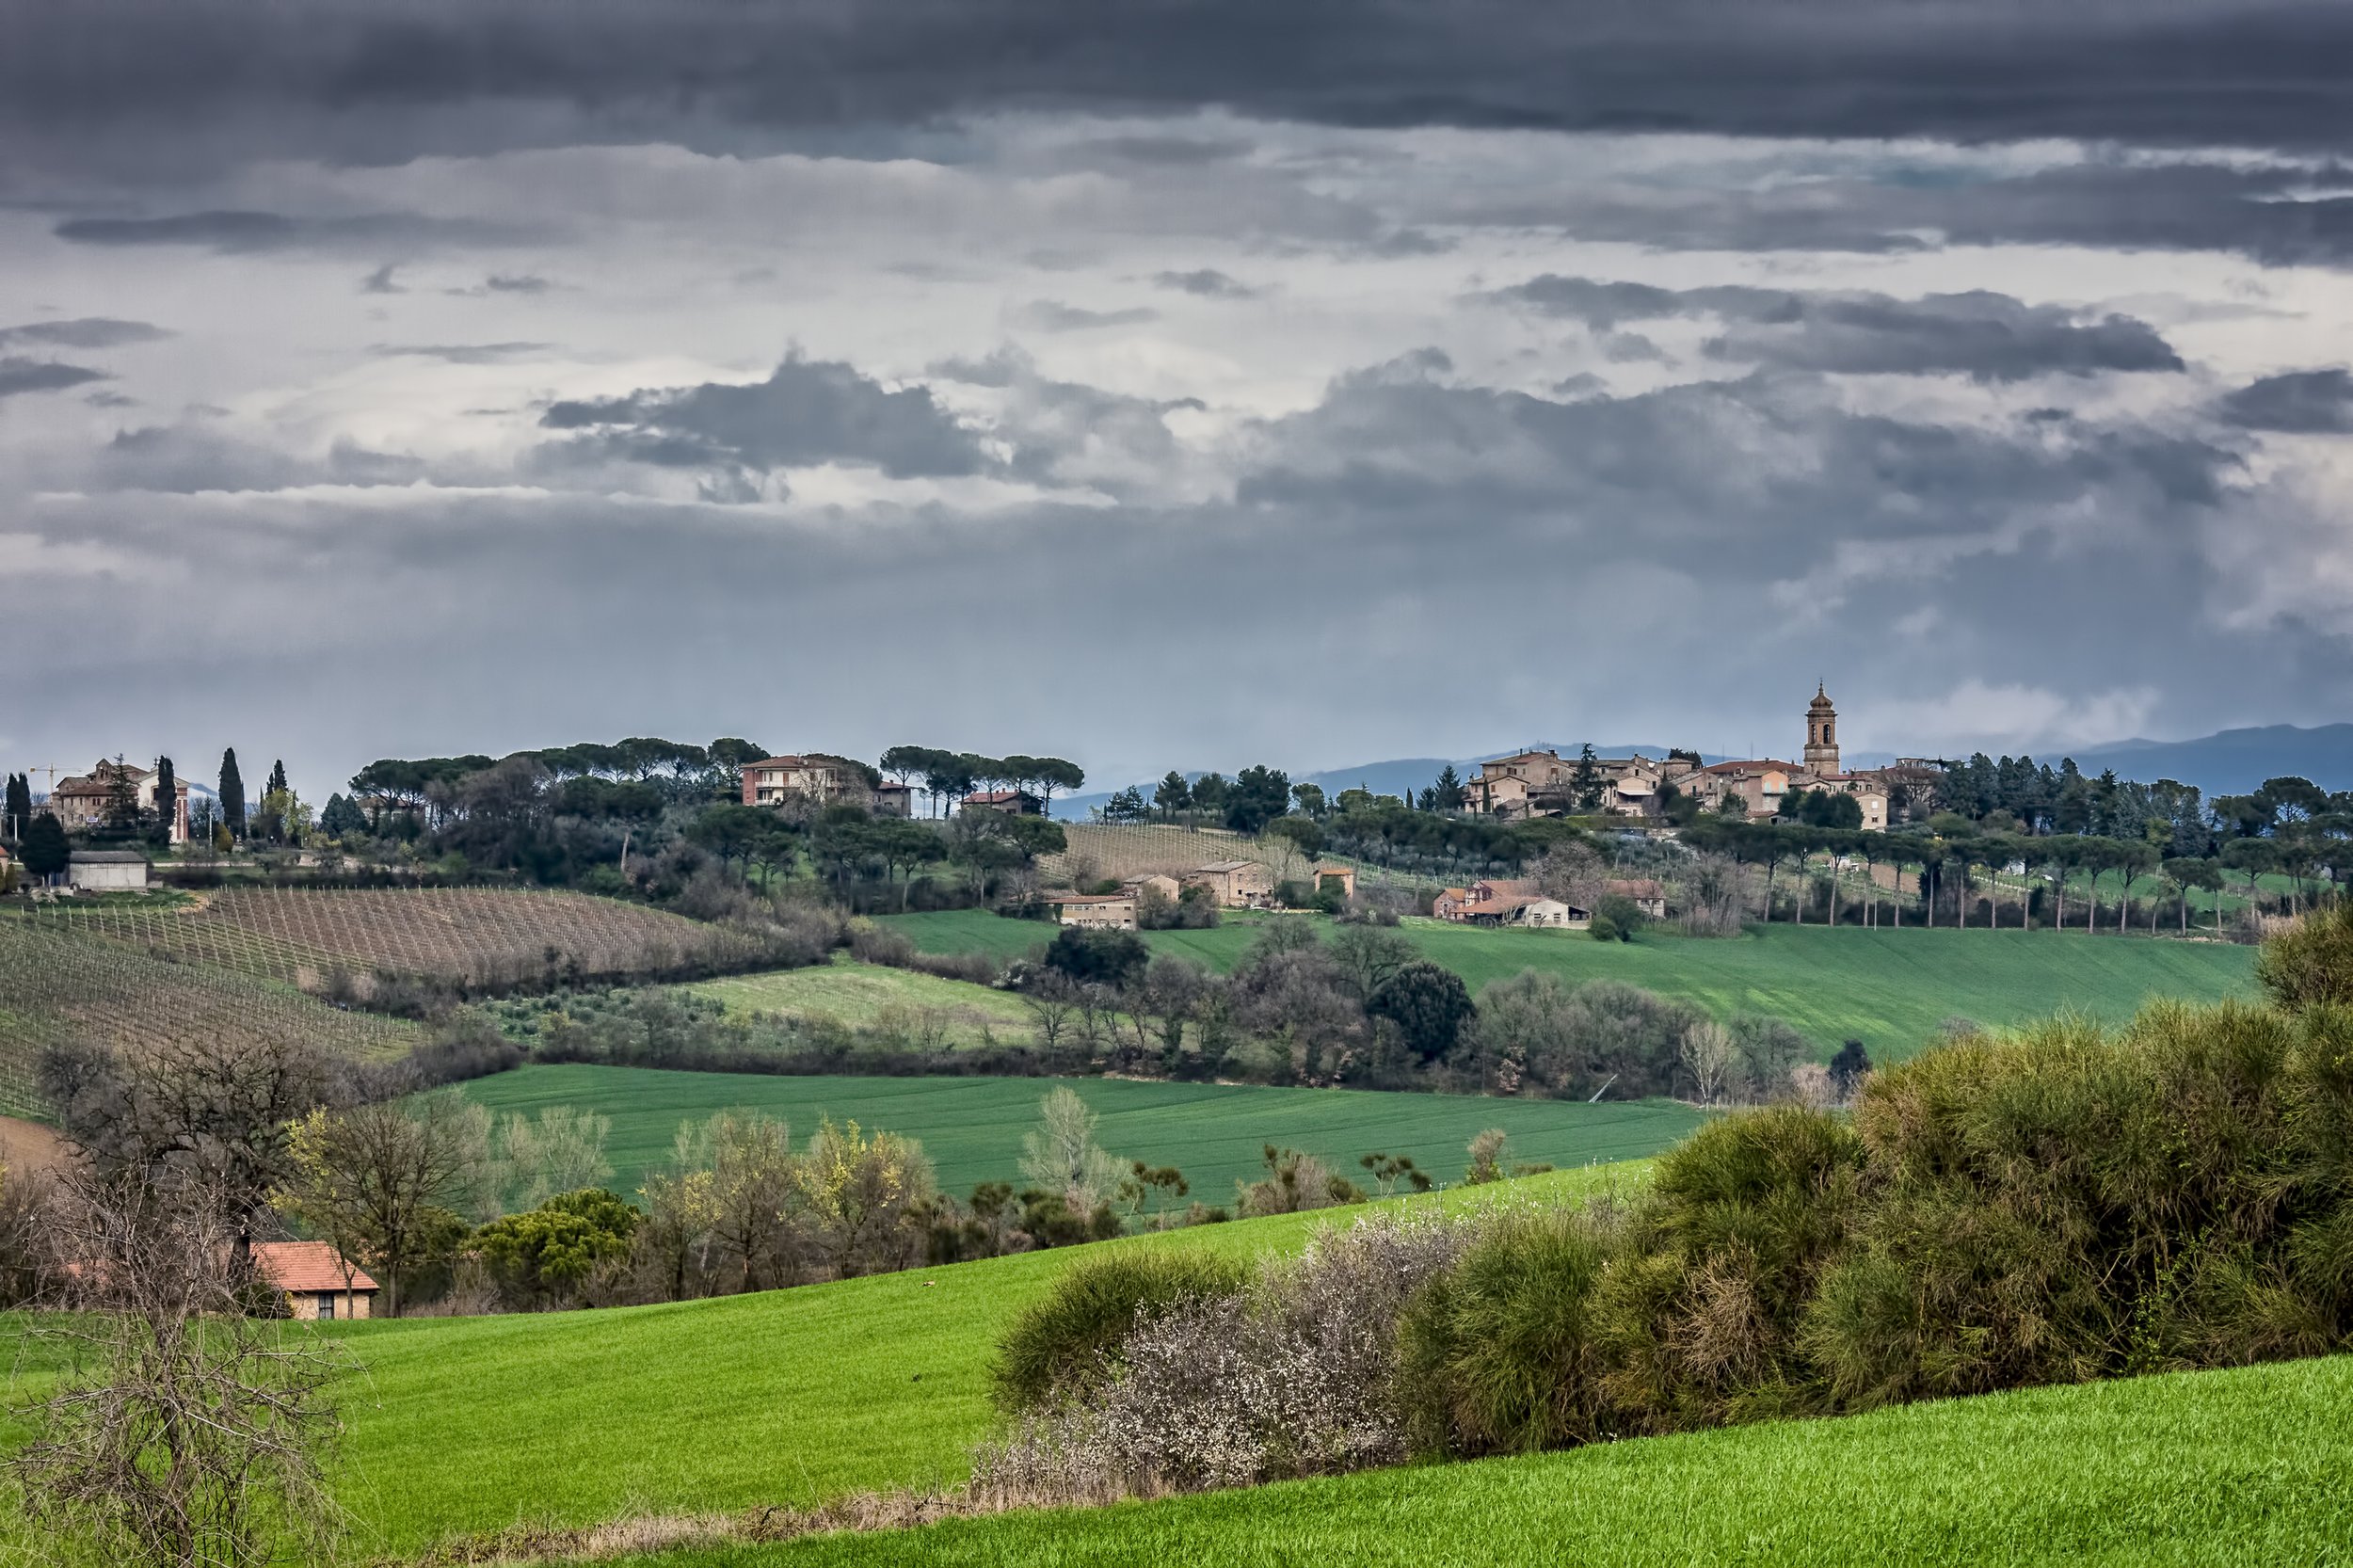 dreamstime_l_33381638 Landscape in Umbria by F Bach.jpg